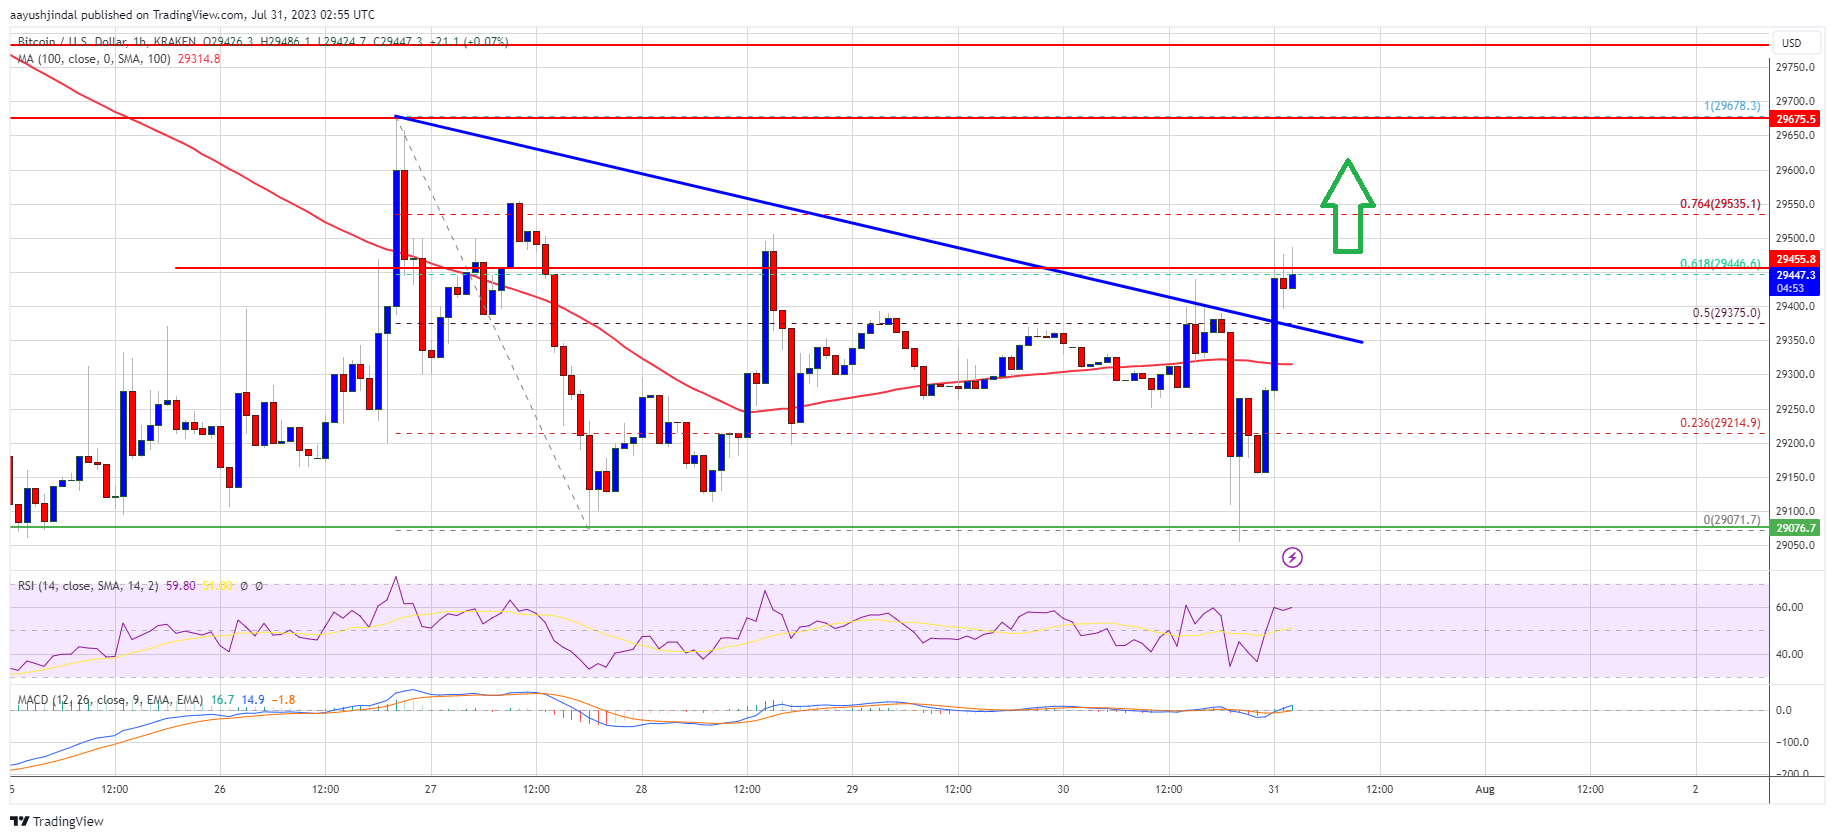 Bitcoin Price Recovers Within Range, Bears Still In Control Below $30K